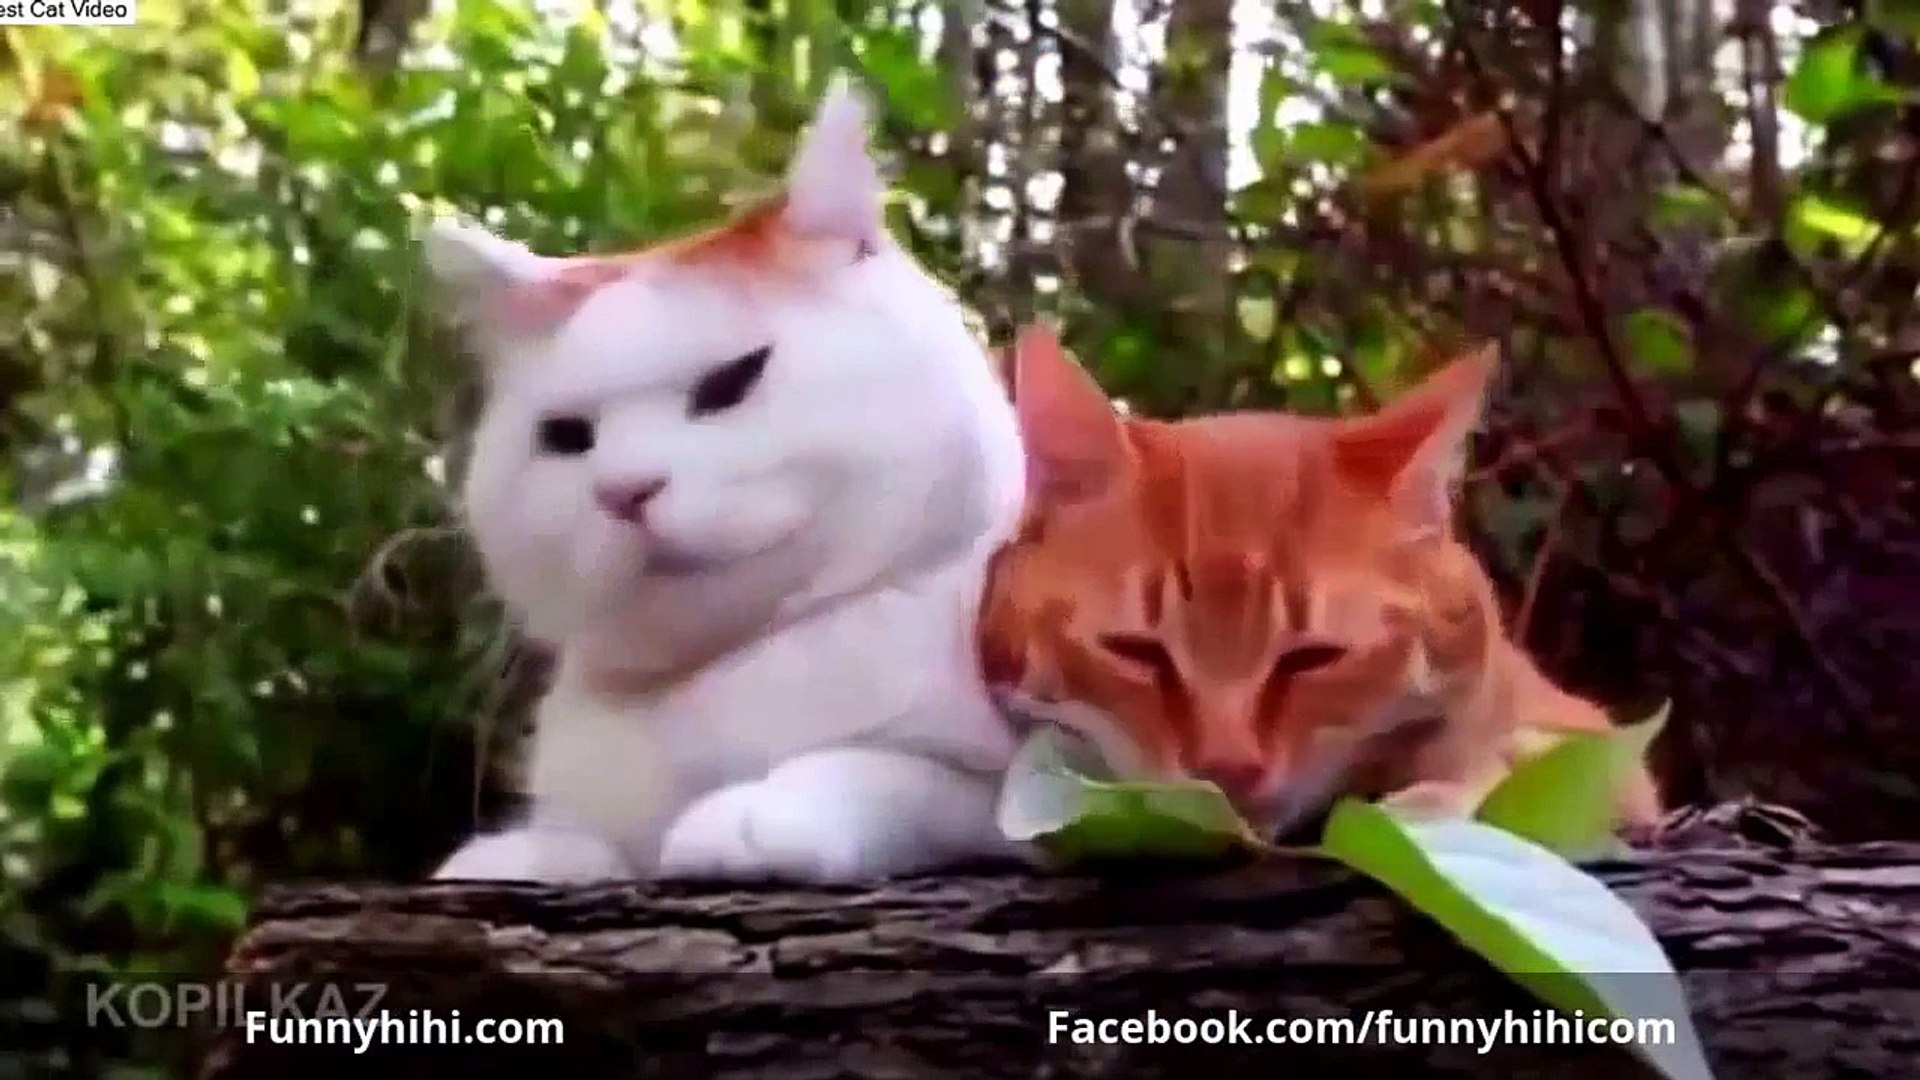 FUNNY CAT VIDEOS - Funny Videos 2015 Funny Cats Best Funny Cat Compilation 2015